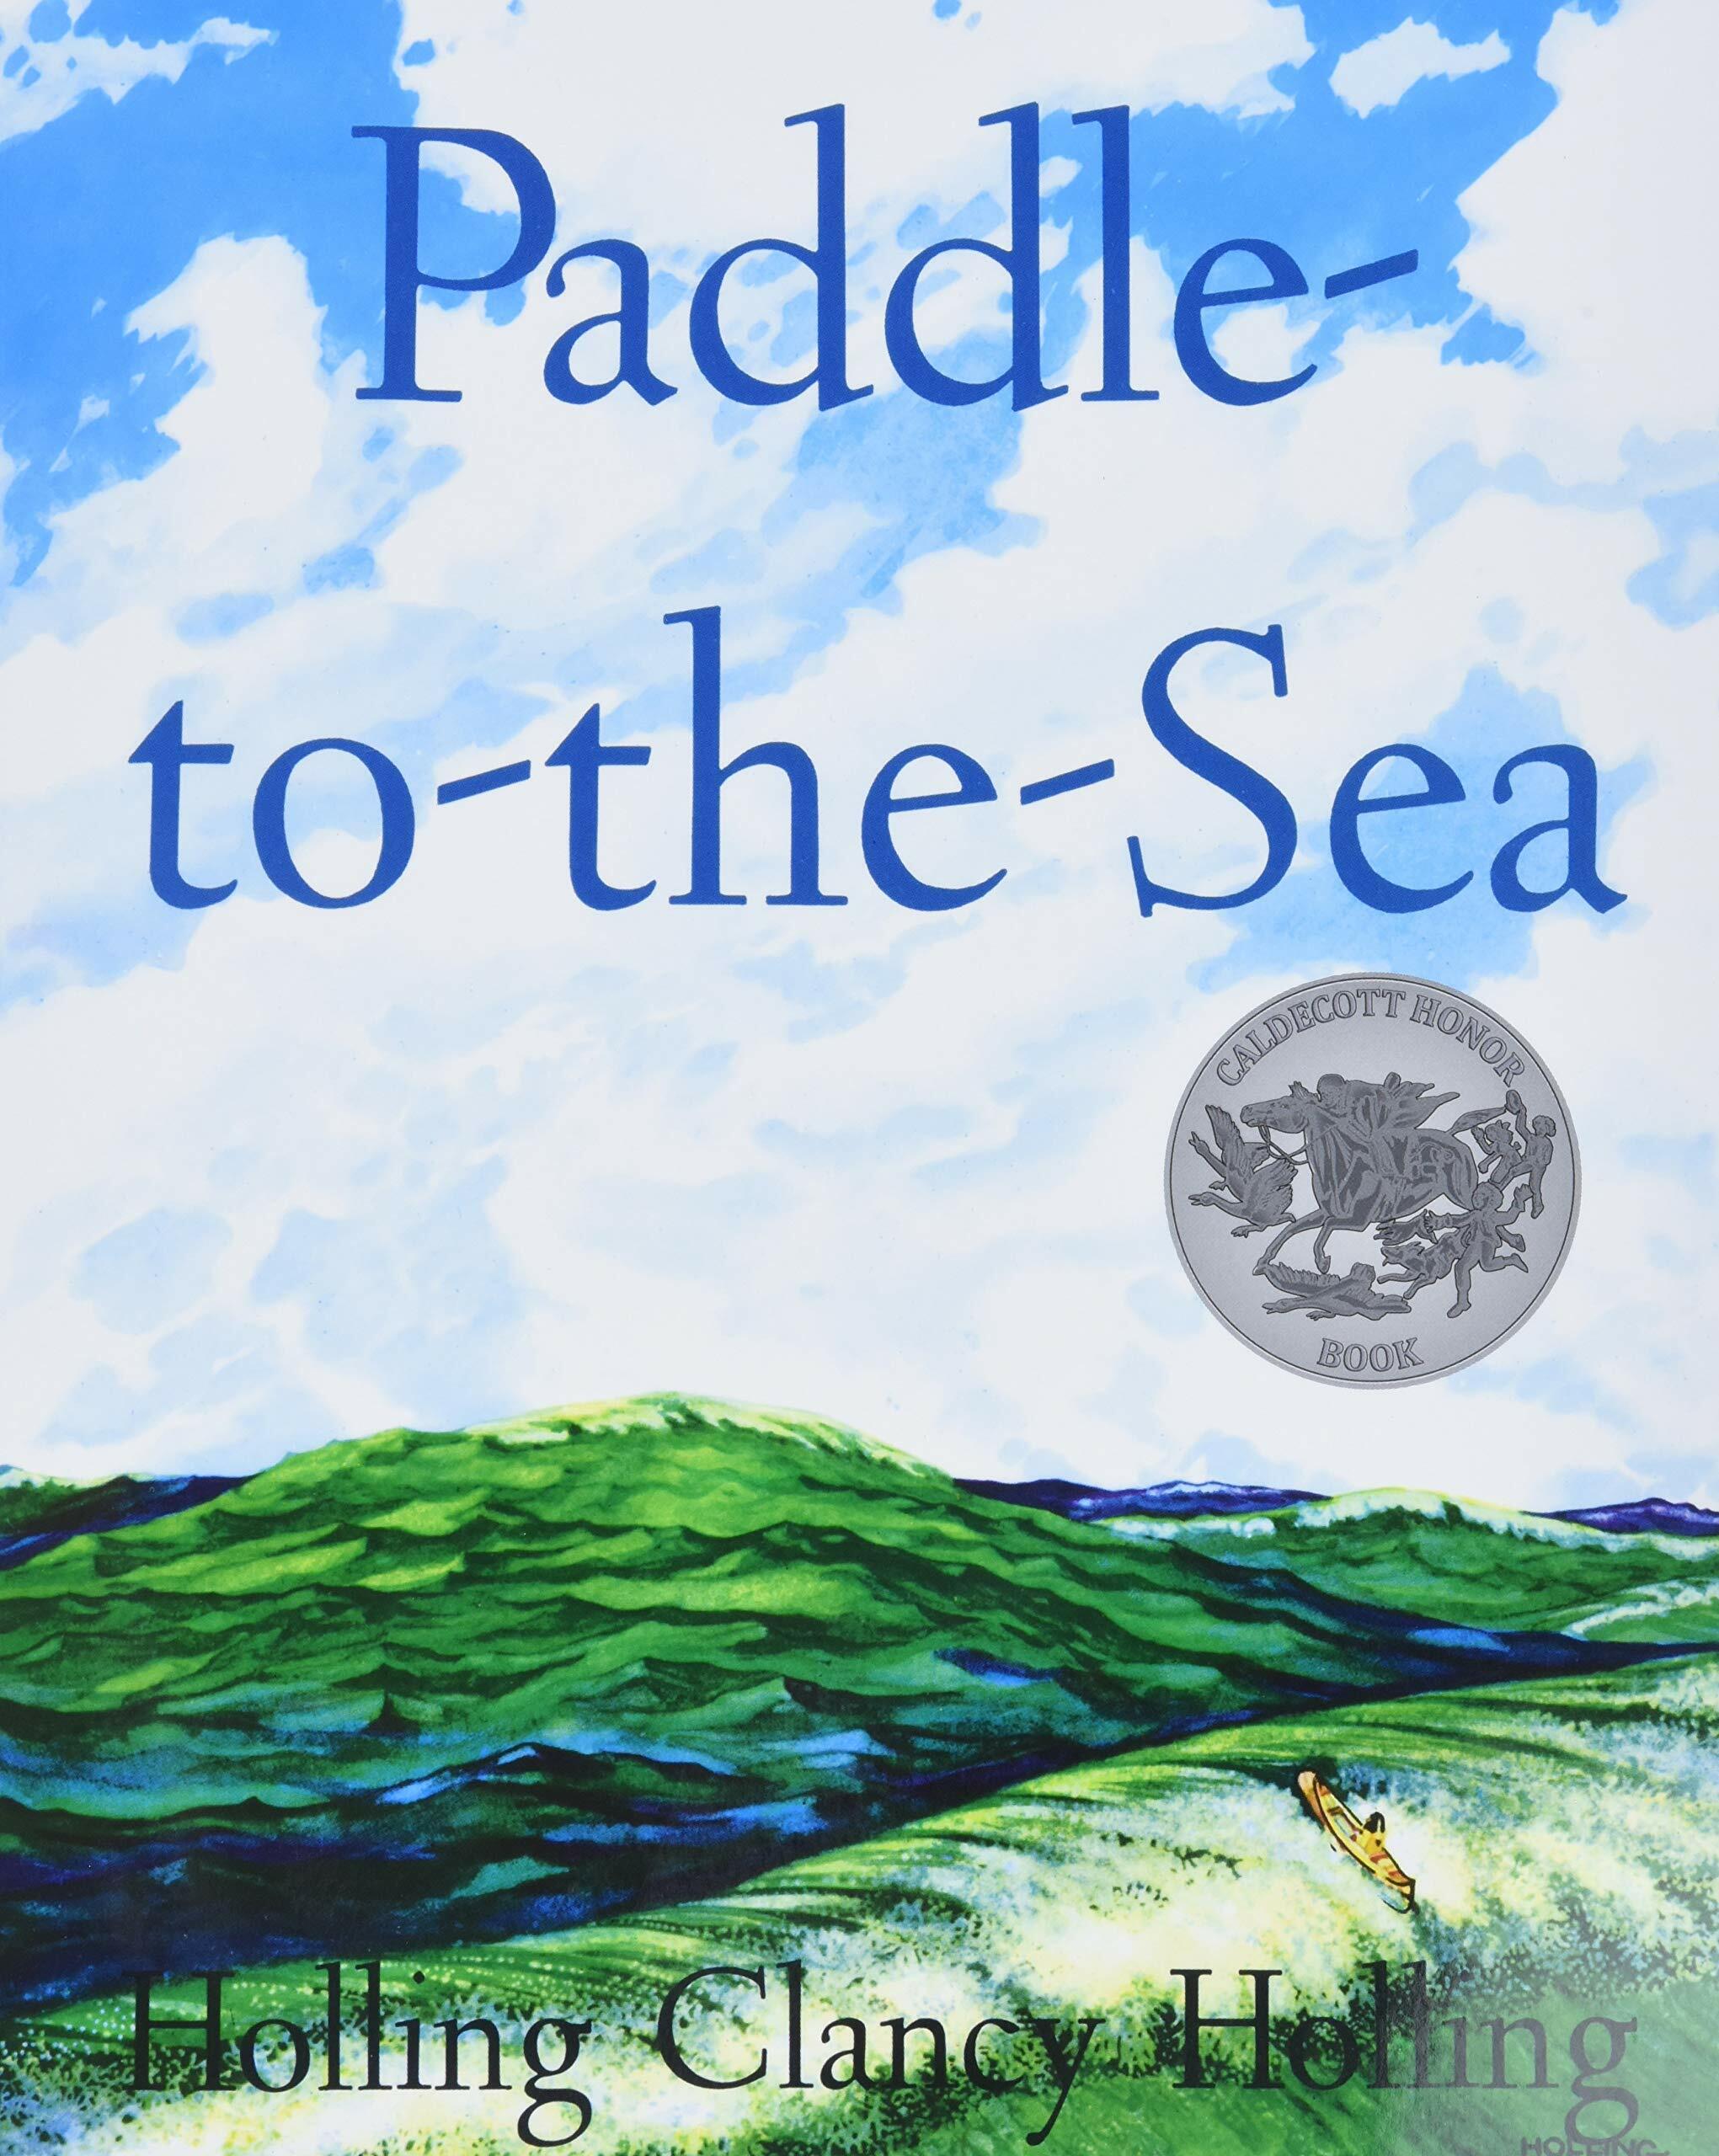 Paddle-To-The-Sea (Paperback)